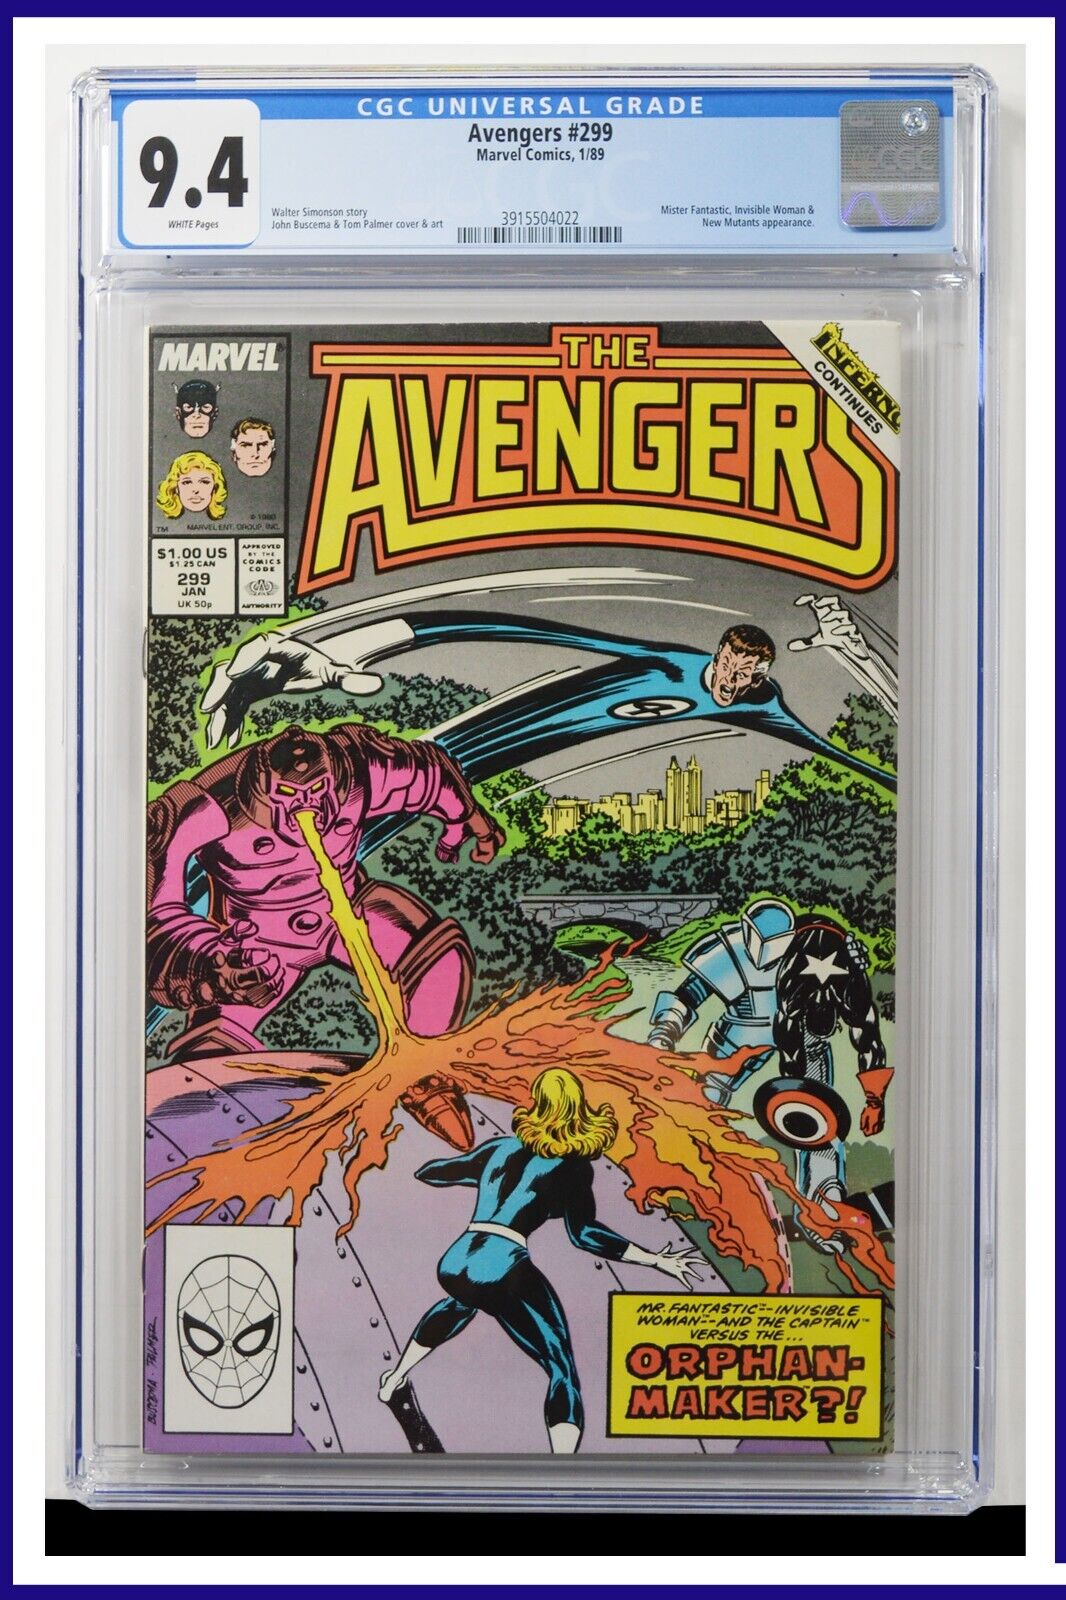 Avengers #299 CGC Graded 9.4 Marvel January 1989 White Pages Comic Book.